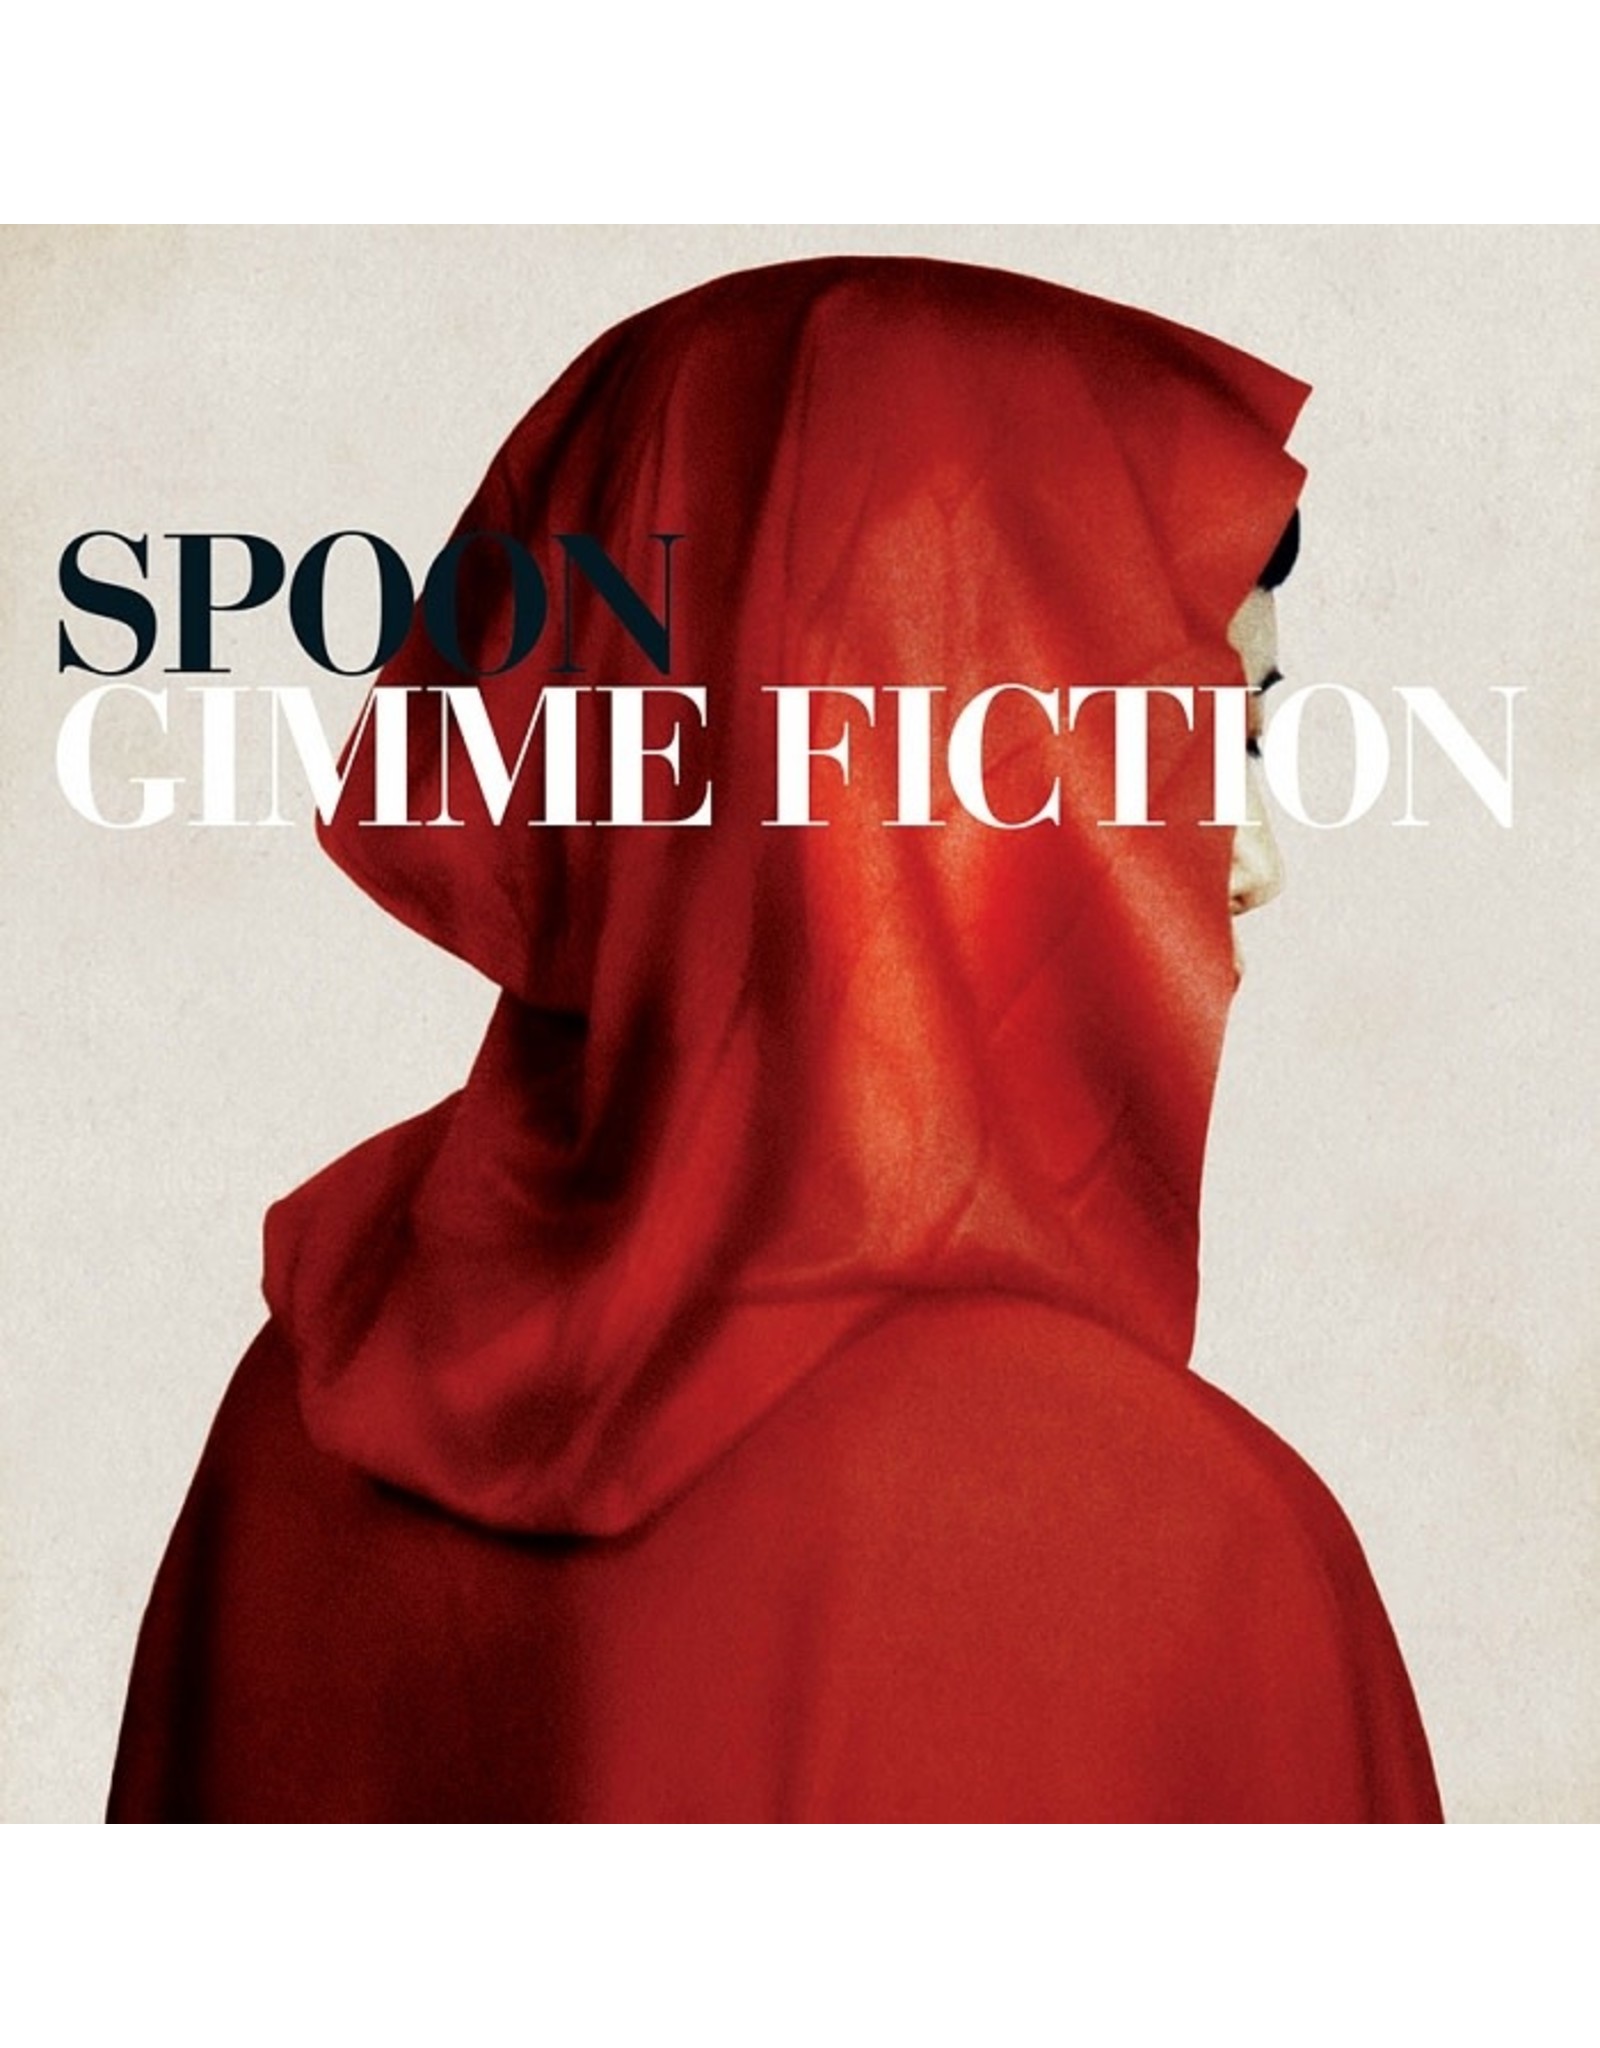 Spoon - Gimme Fiction (Red / White Vinyl)